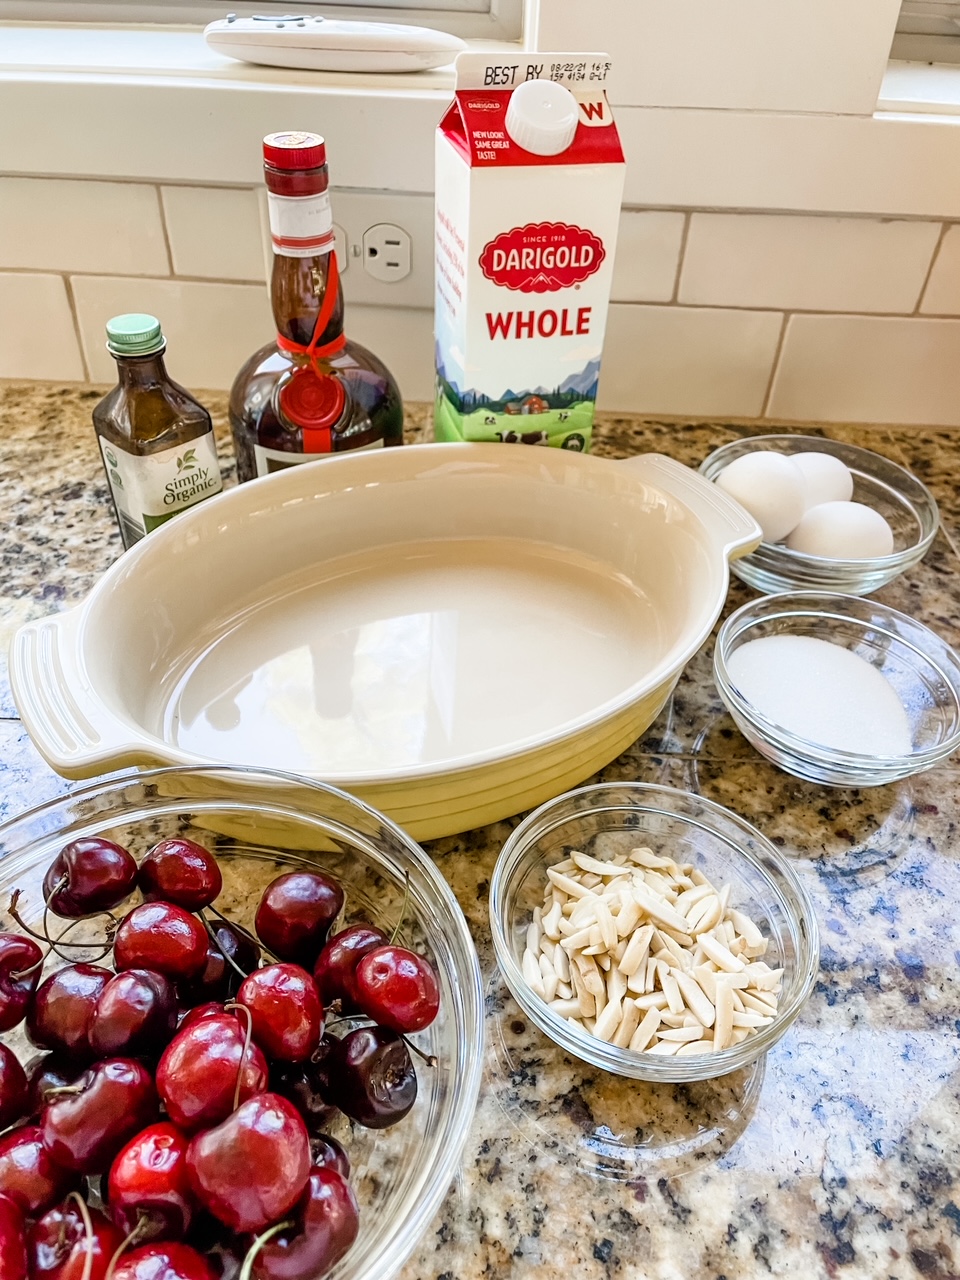 The ingredients for the Fresh Cherry Clafoutis